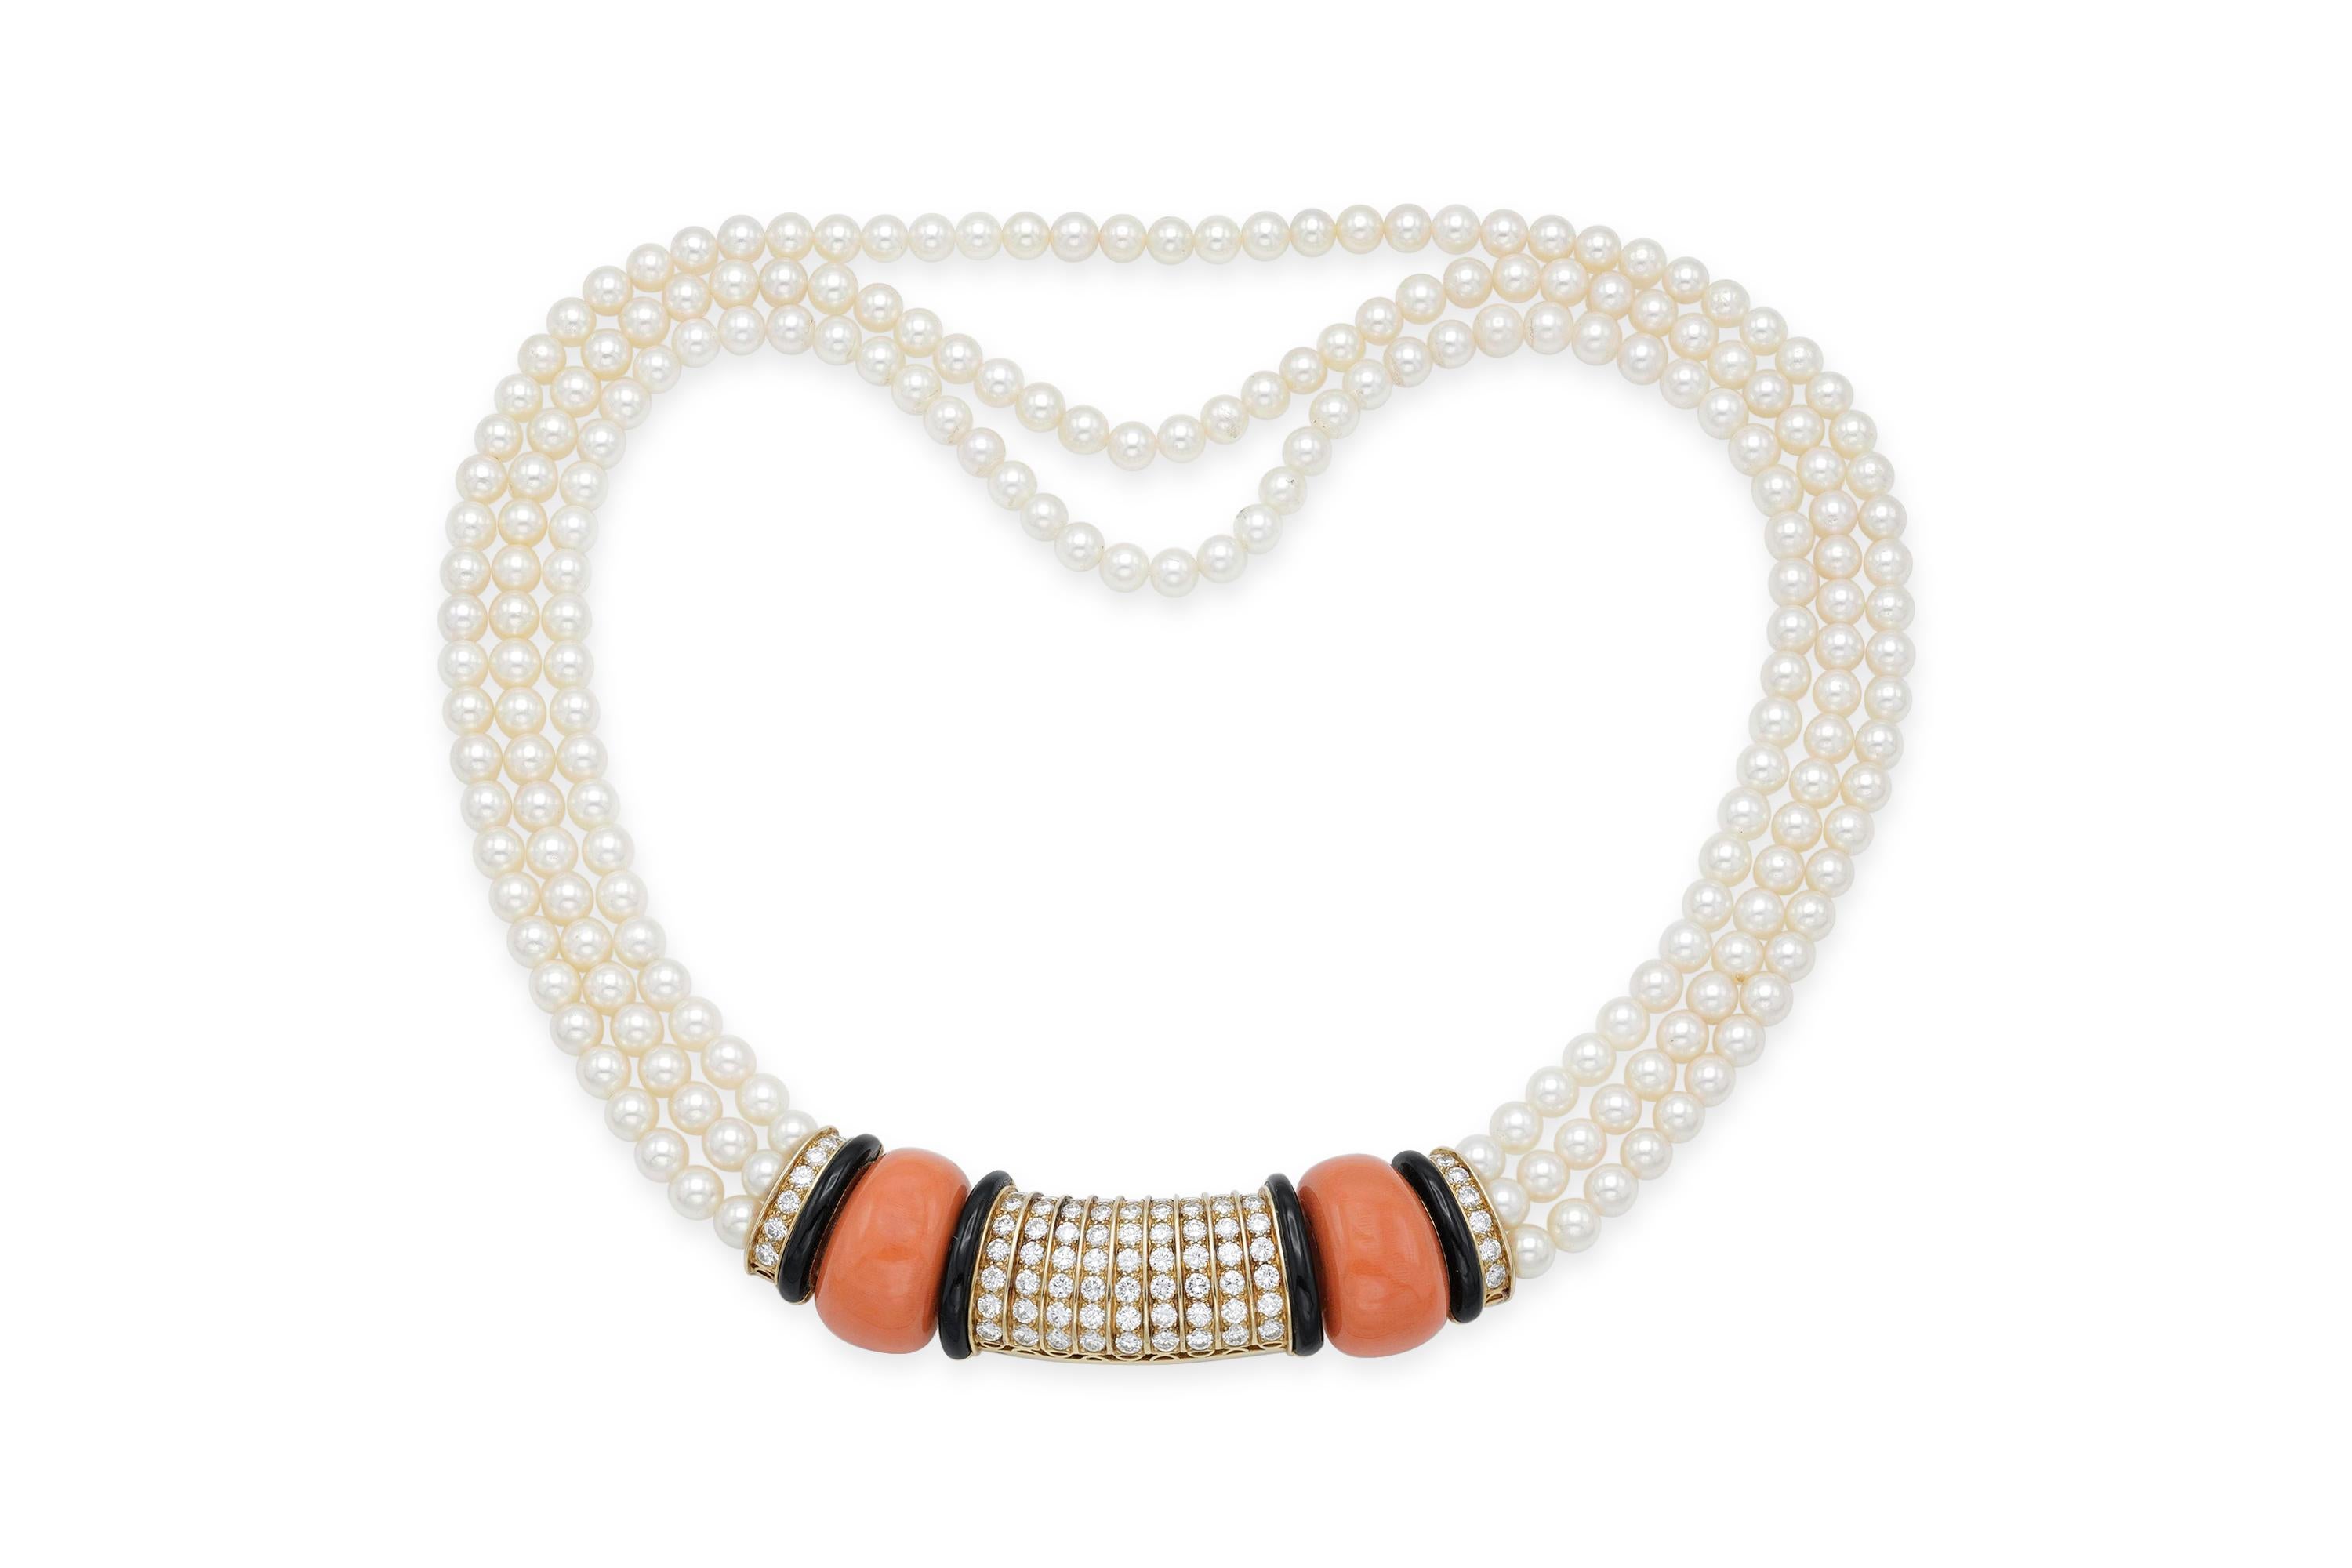 Finely crafted in 18k yellow gold with three strands of pearls, coral, onyx, and approximately 6.00 carats of Round Brilliant cut diamonds.
Signed by Van Cleef & Arpels.
Circa 1960s.